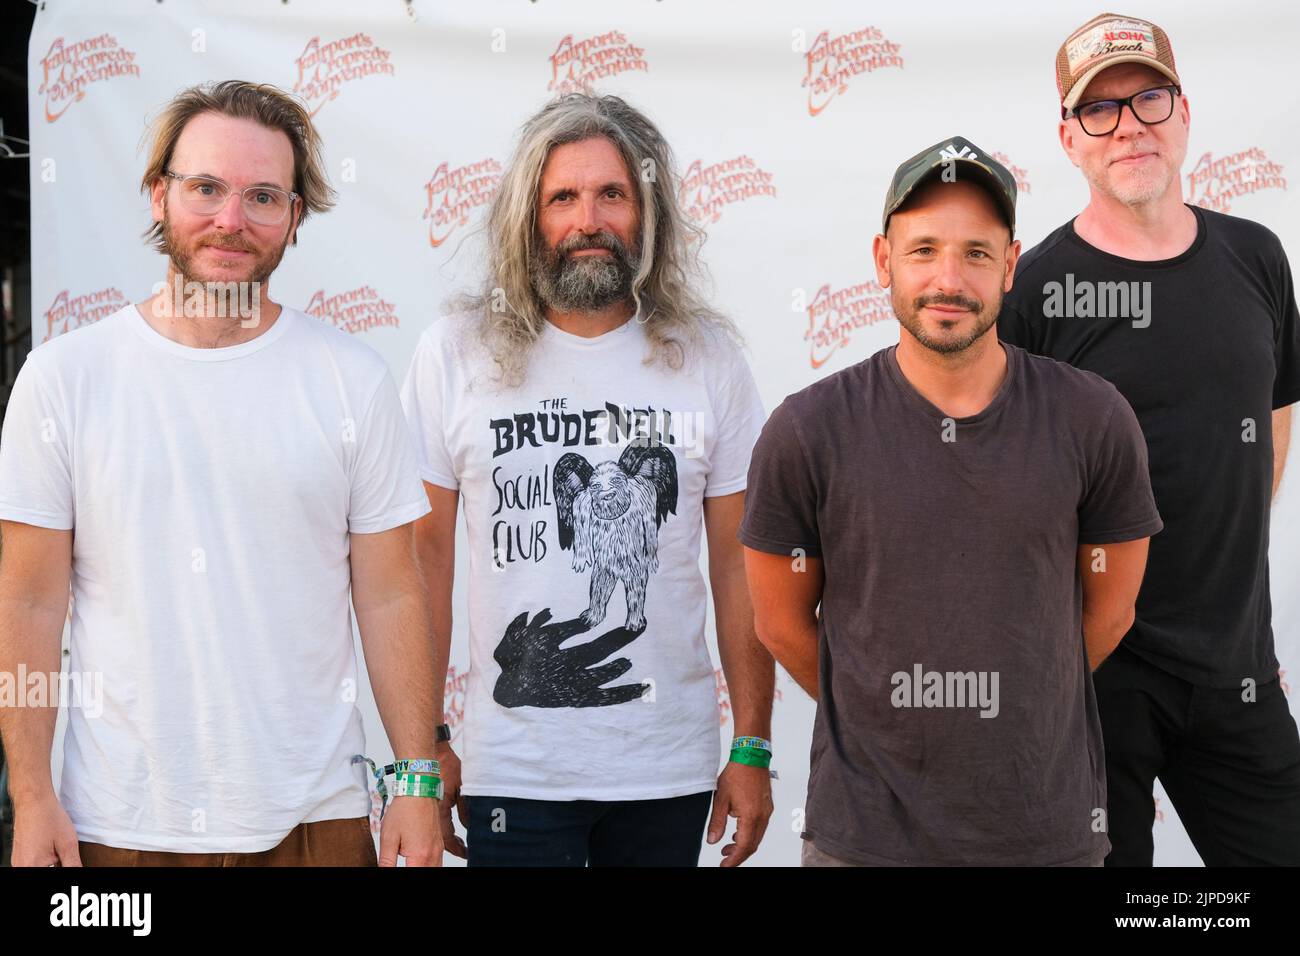 Turin Brakes (Olly Knights, Eddie Myer, Rob Allum and    Gale Paridjanian) backstage at Fairport's Cropredy Convention. Banbury, UK. August 12, 2022 Stock Photo